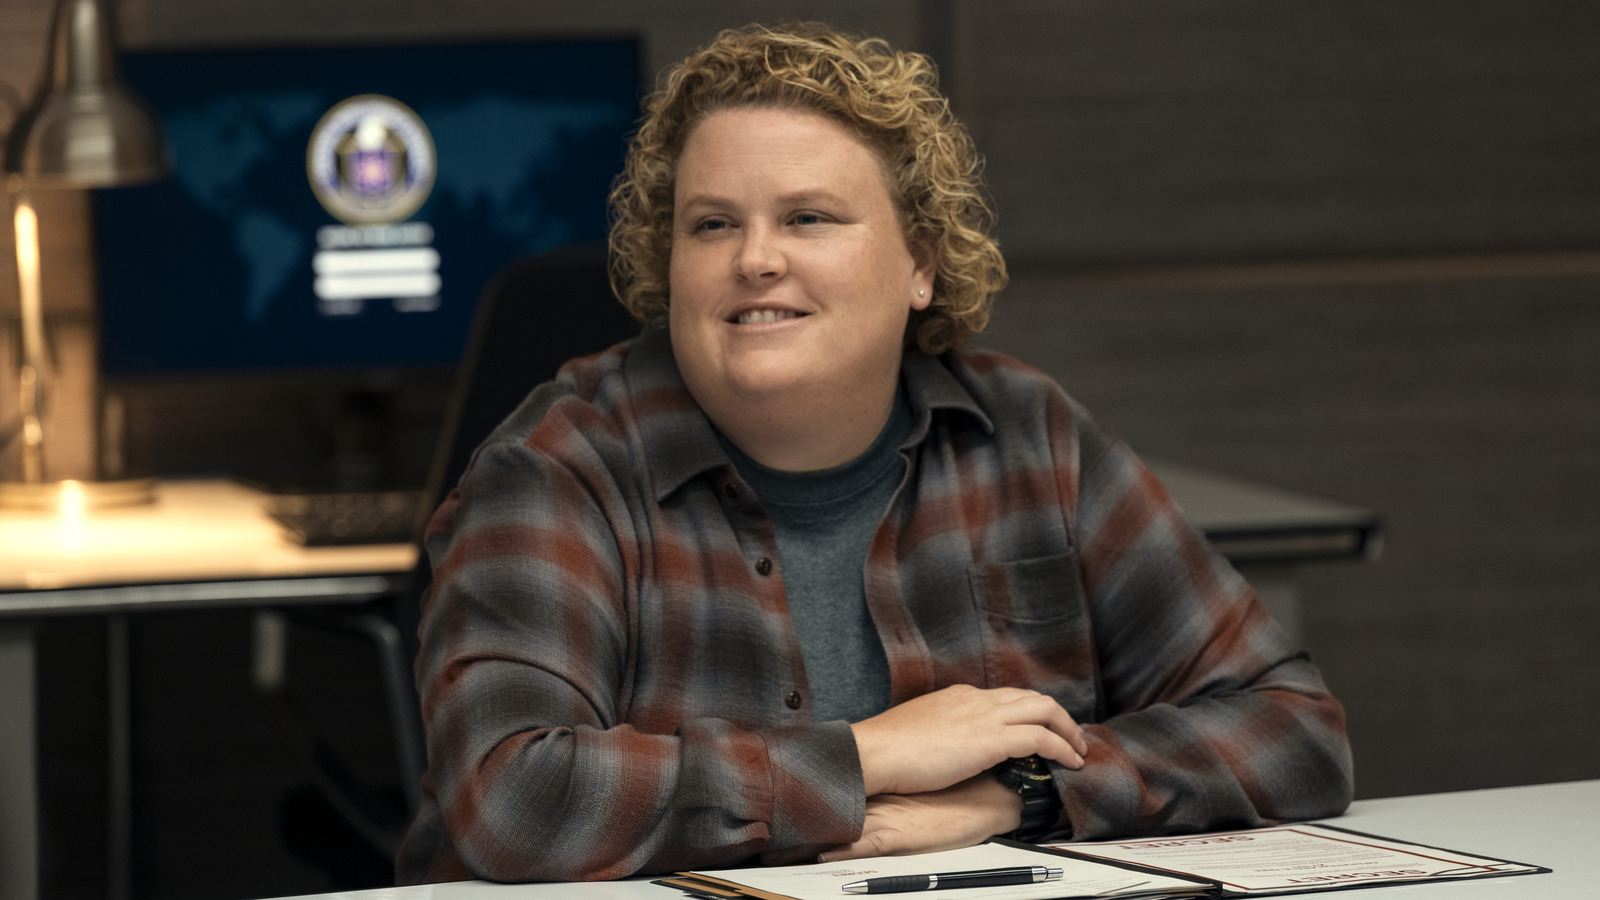 FUBAR: Who Is Fortune Feimster & Where Do You Recognize Her From?